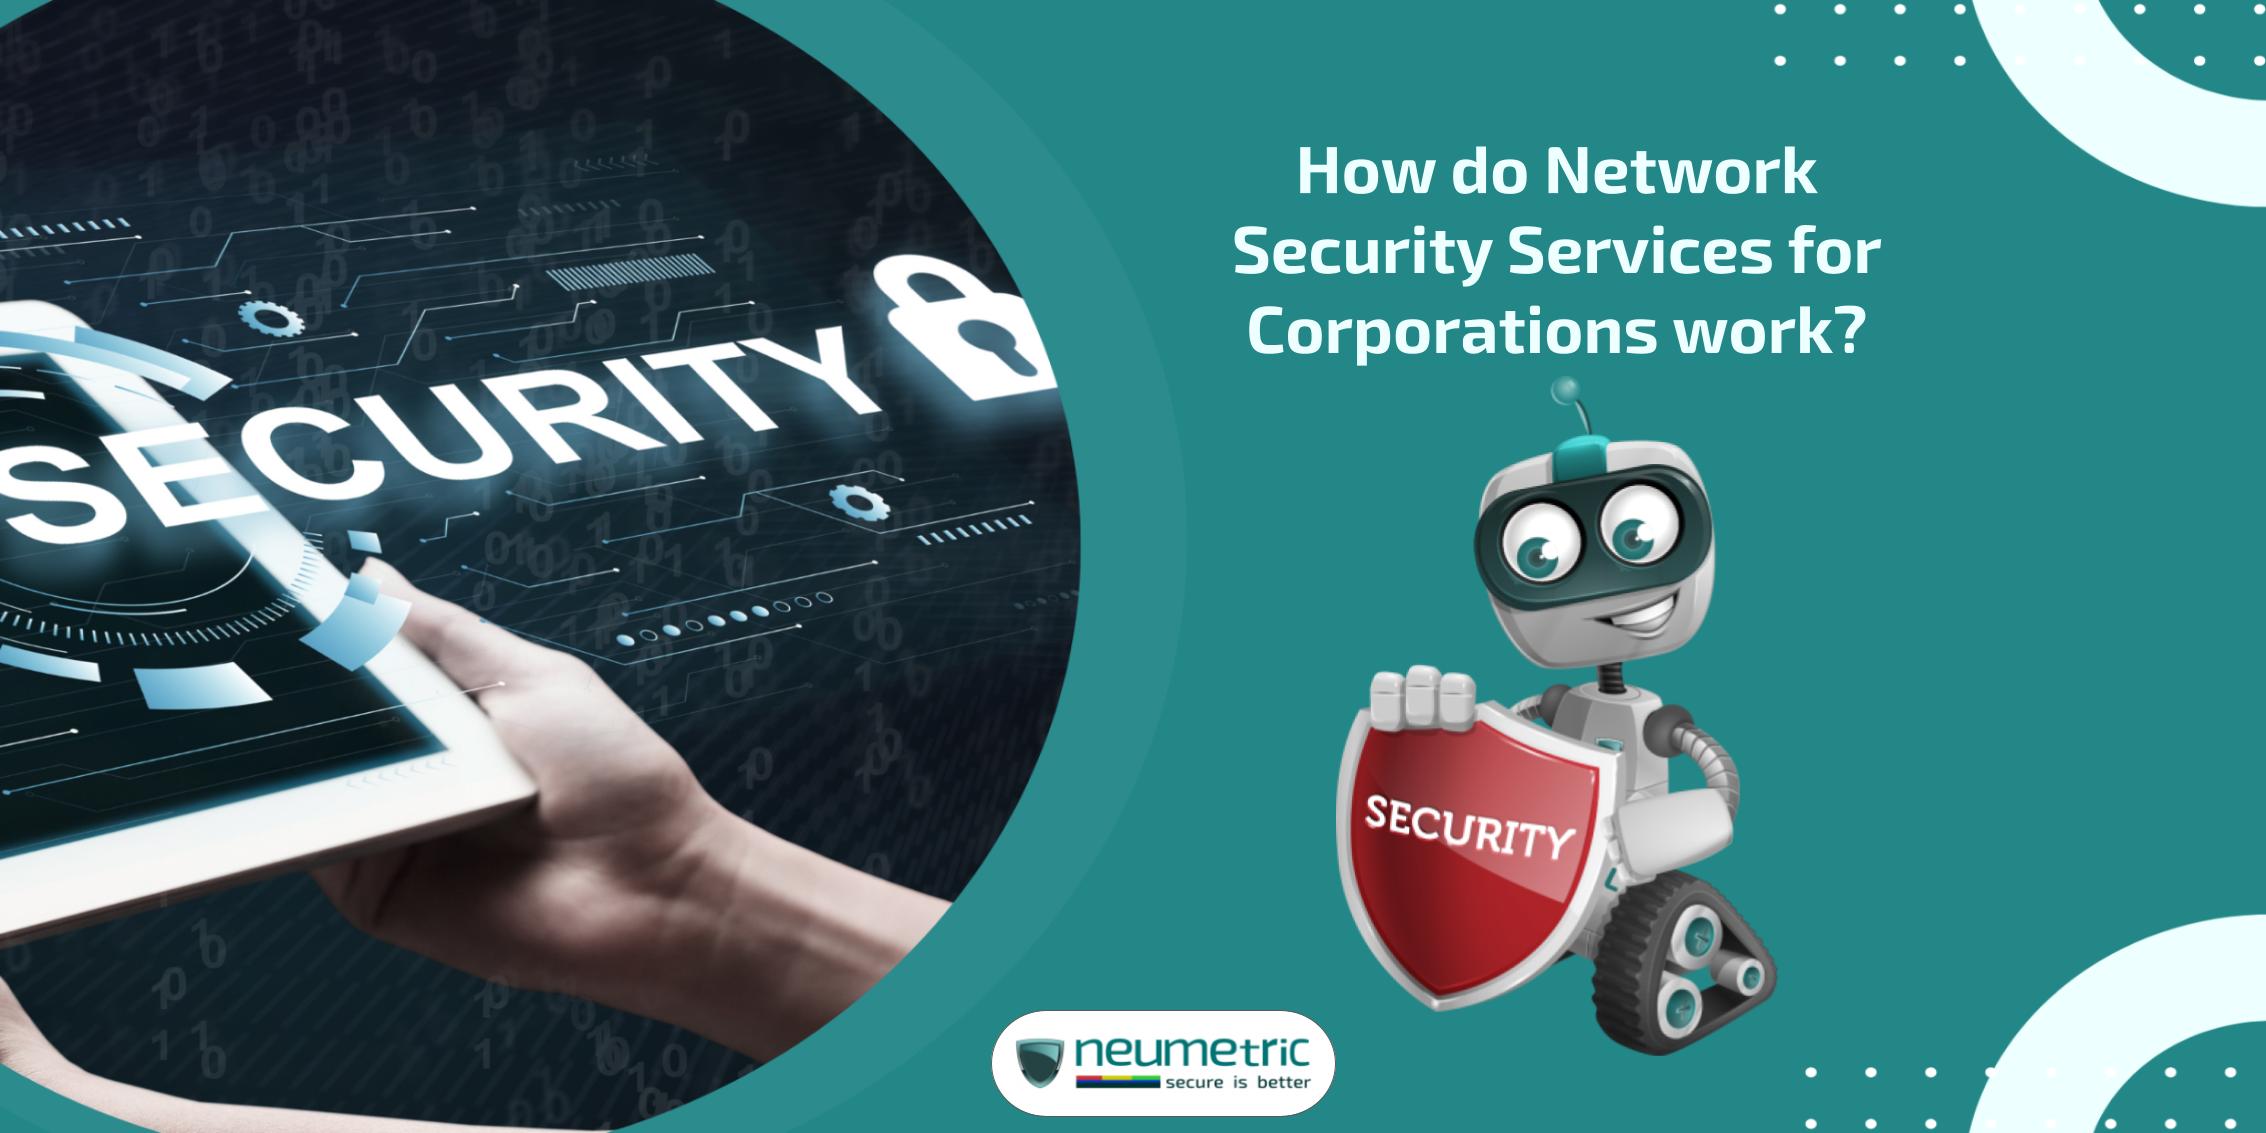 Network security services for corporations